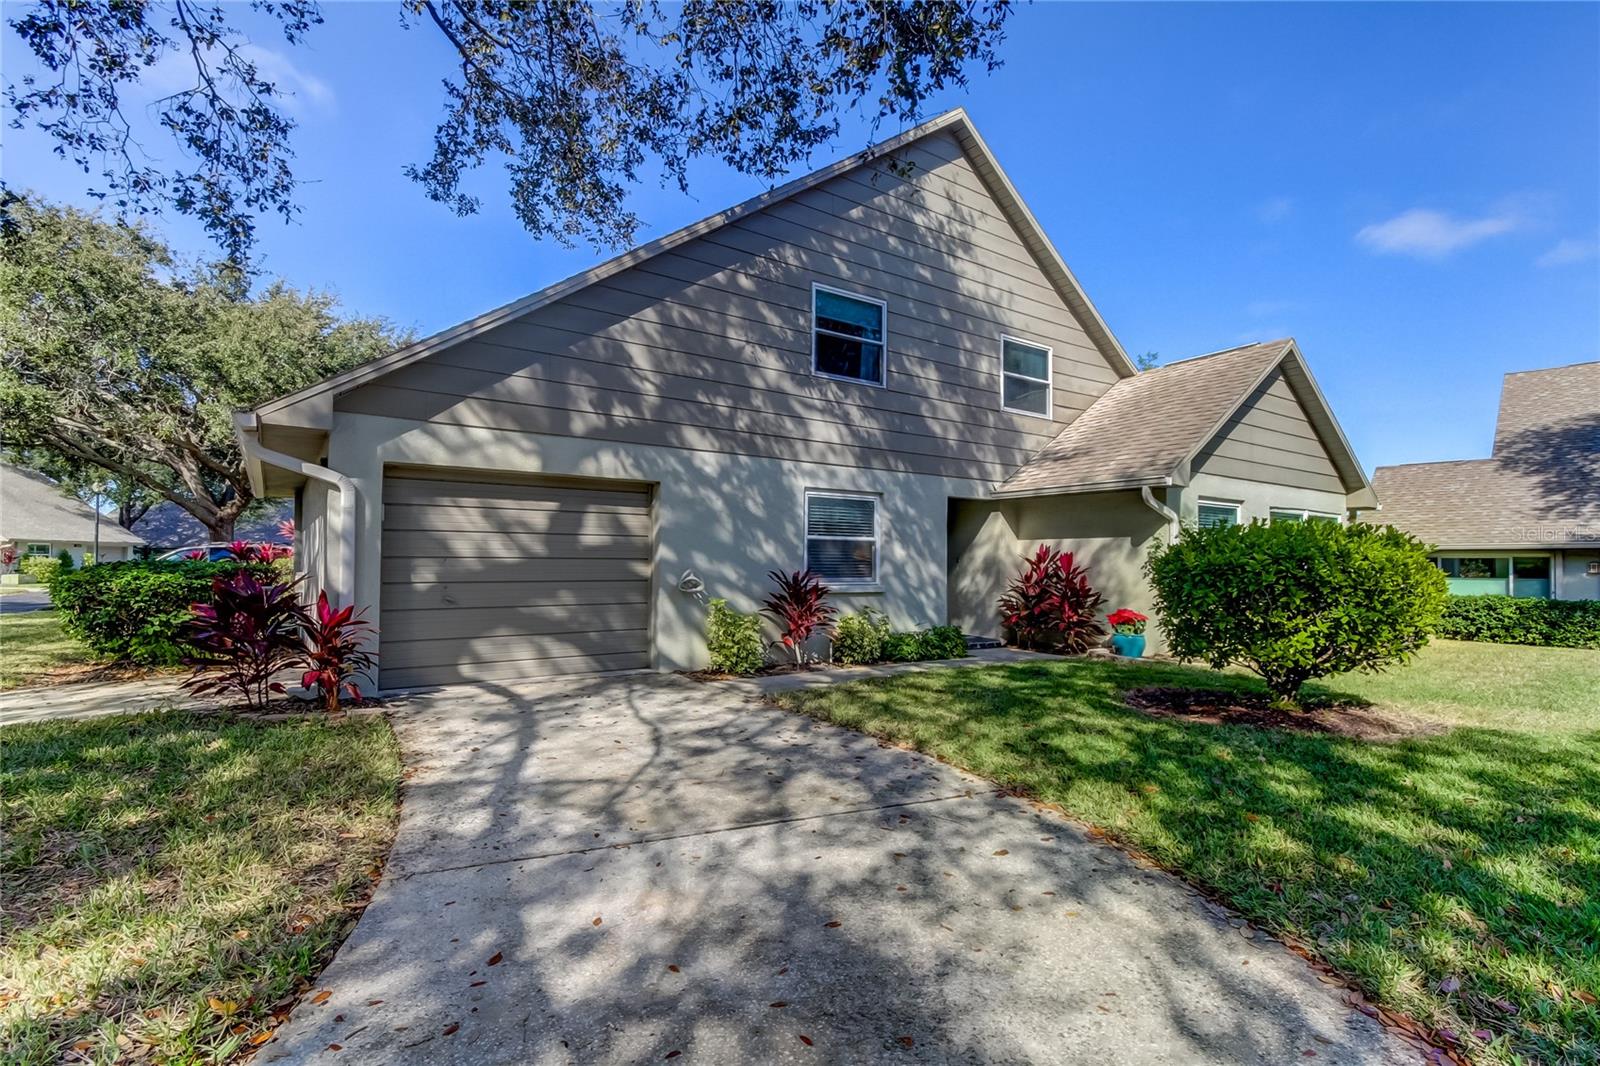 2822 Rampart Cir, Clearwater, FL. 33761 - In the Crux of North Pinellas County - Minutes to Beaches!